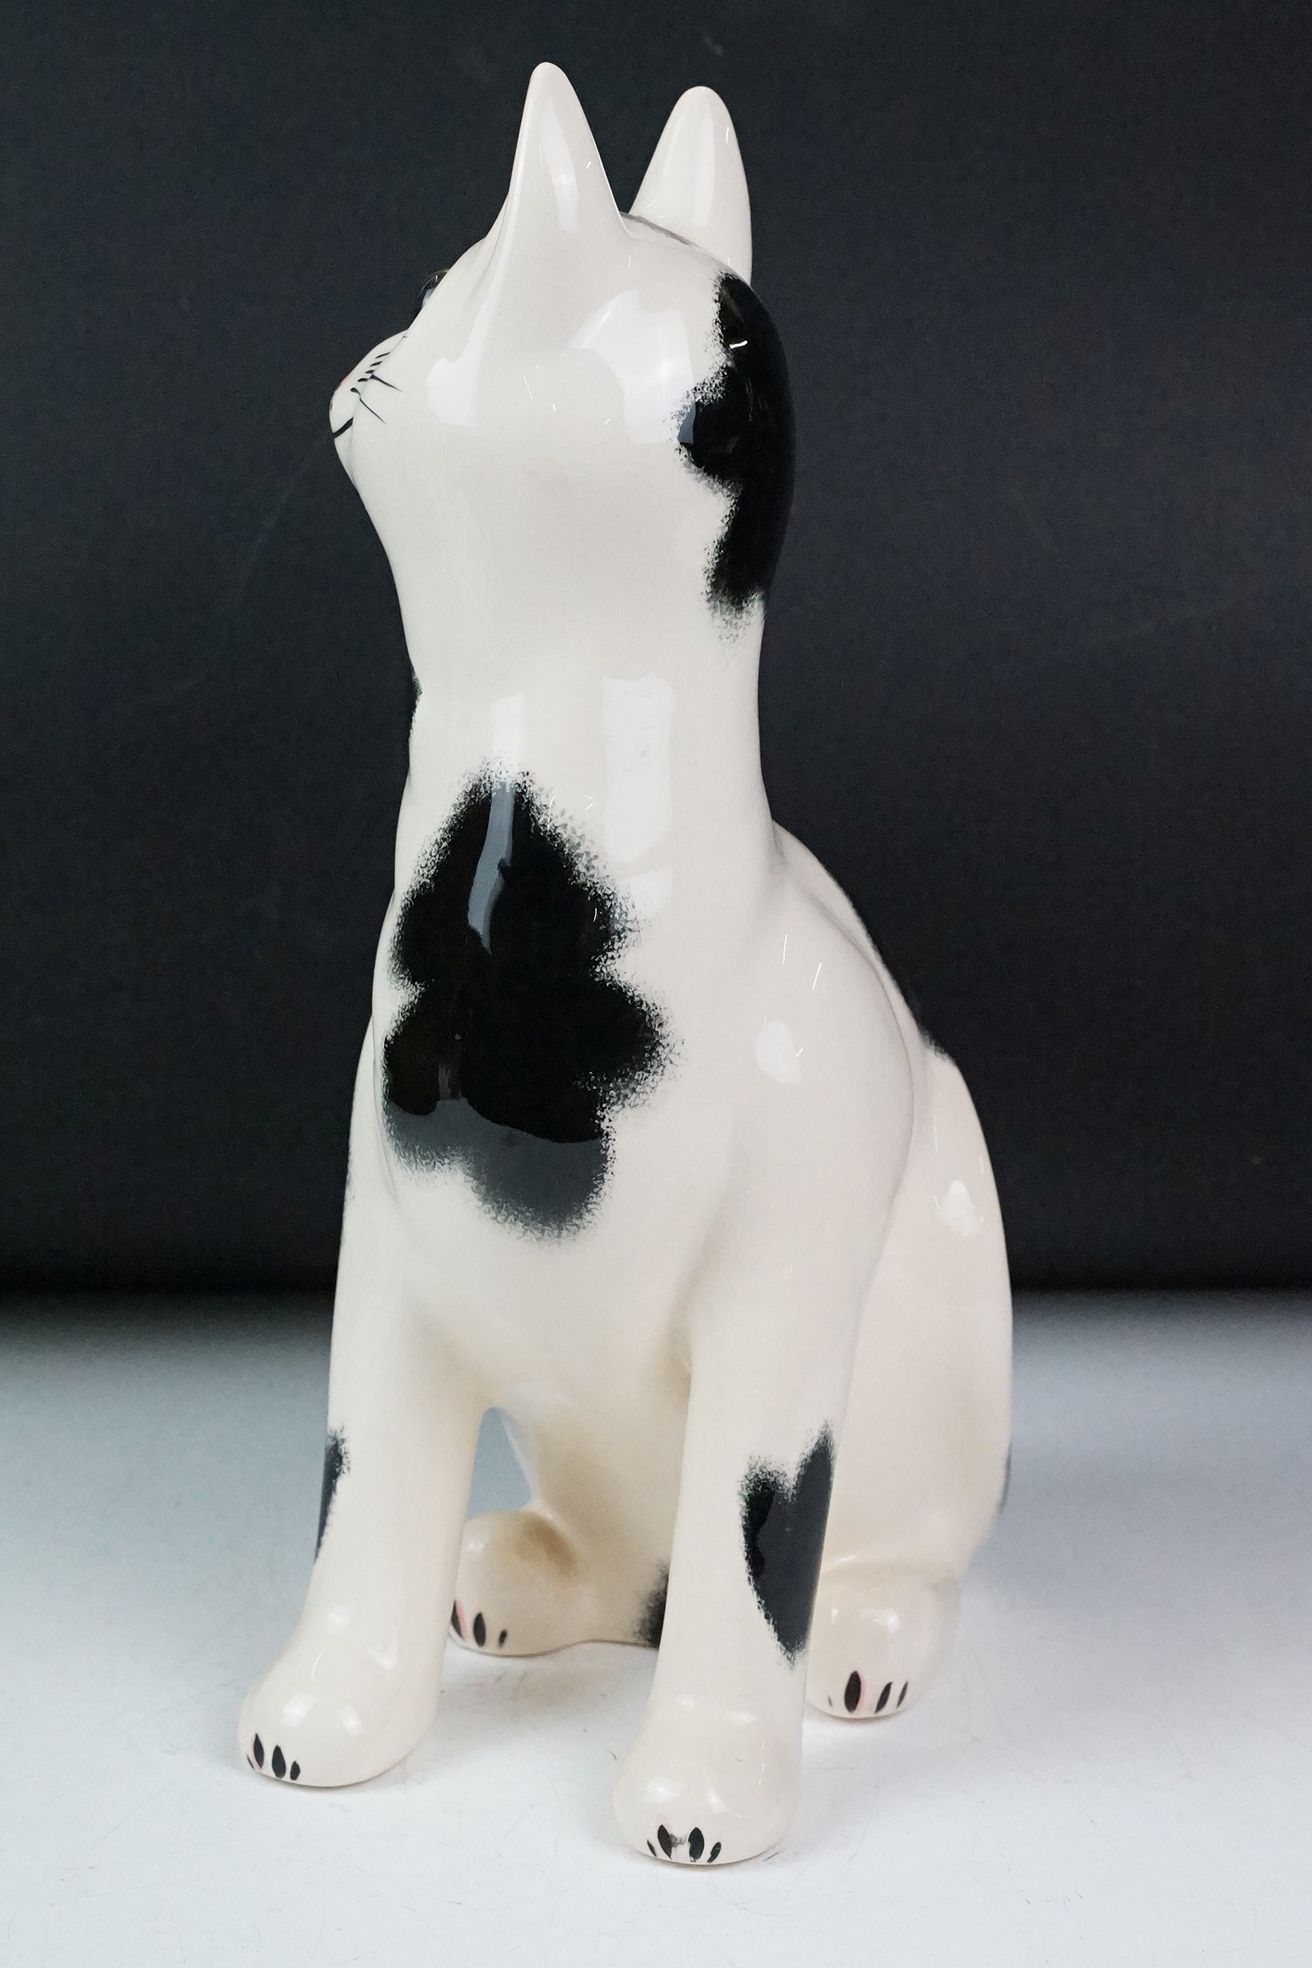 Griselda Hill Pottery Wemyss black and white cat, signed G. Hill Pottery to base and Wemyss, 34cm - Image 4 of 10